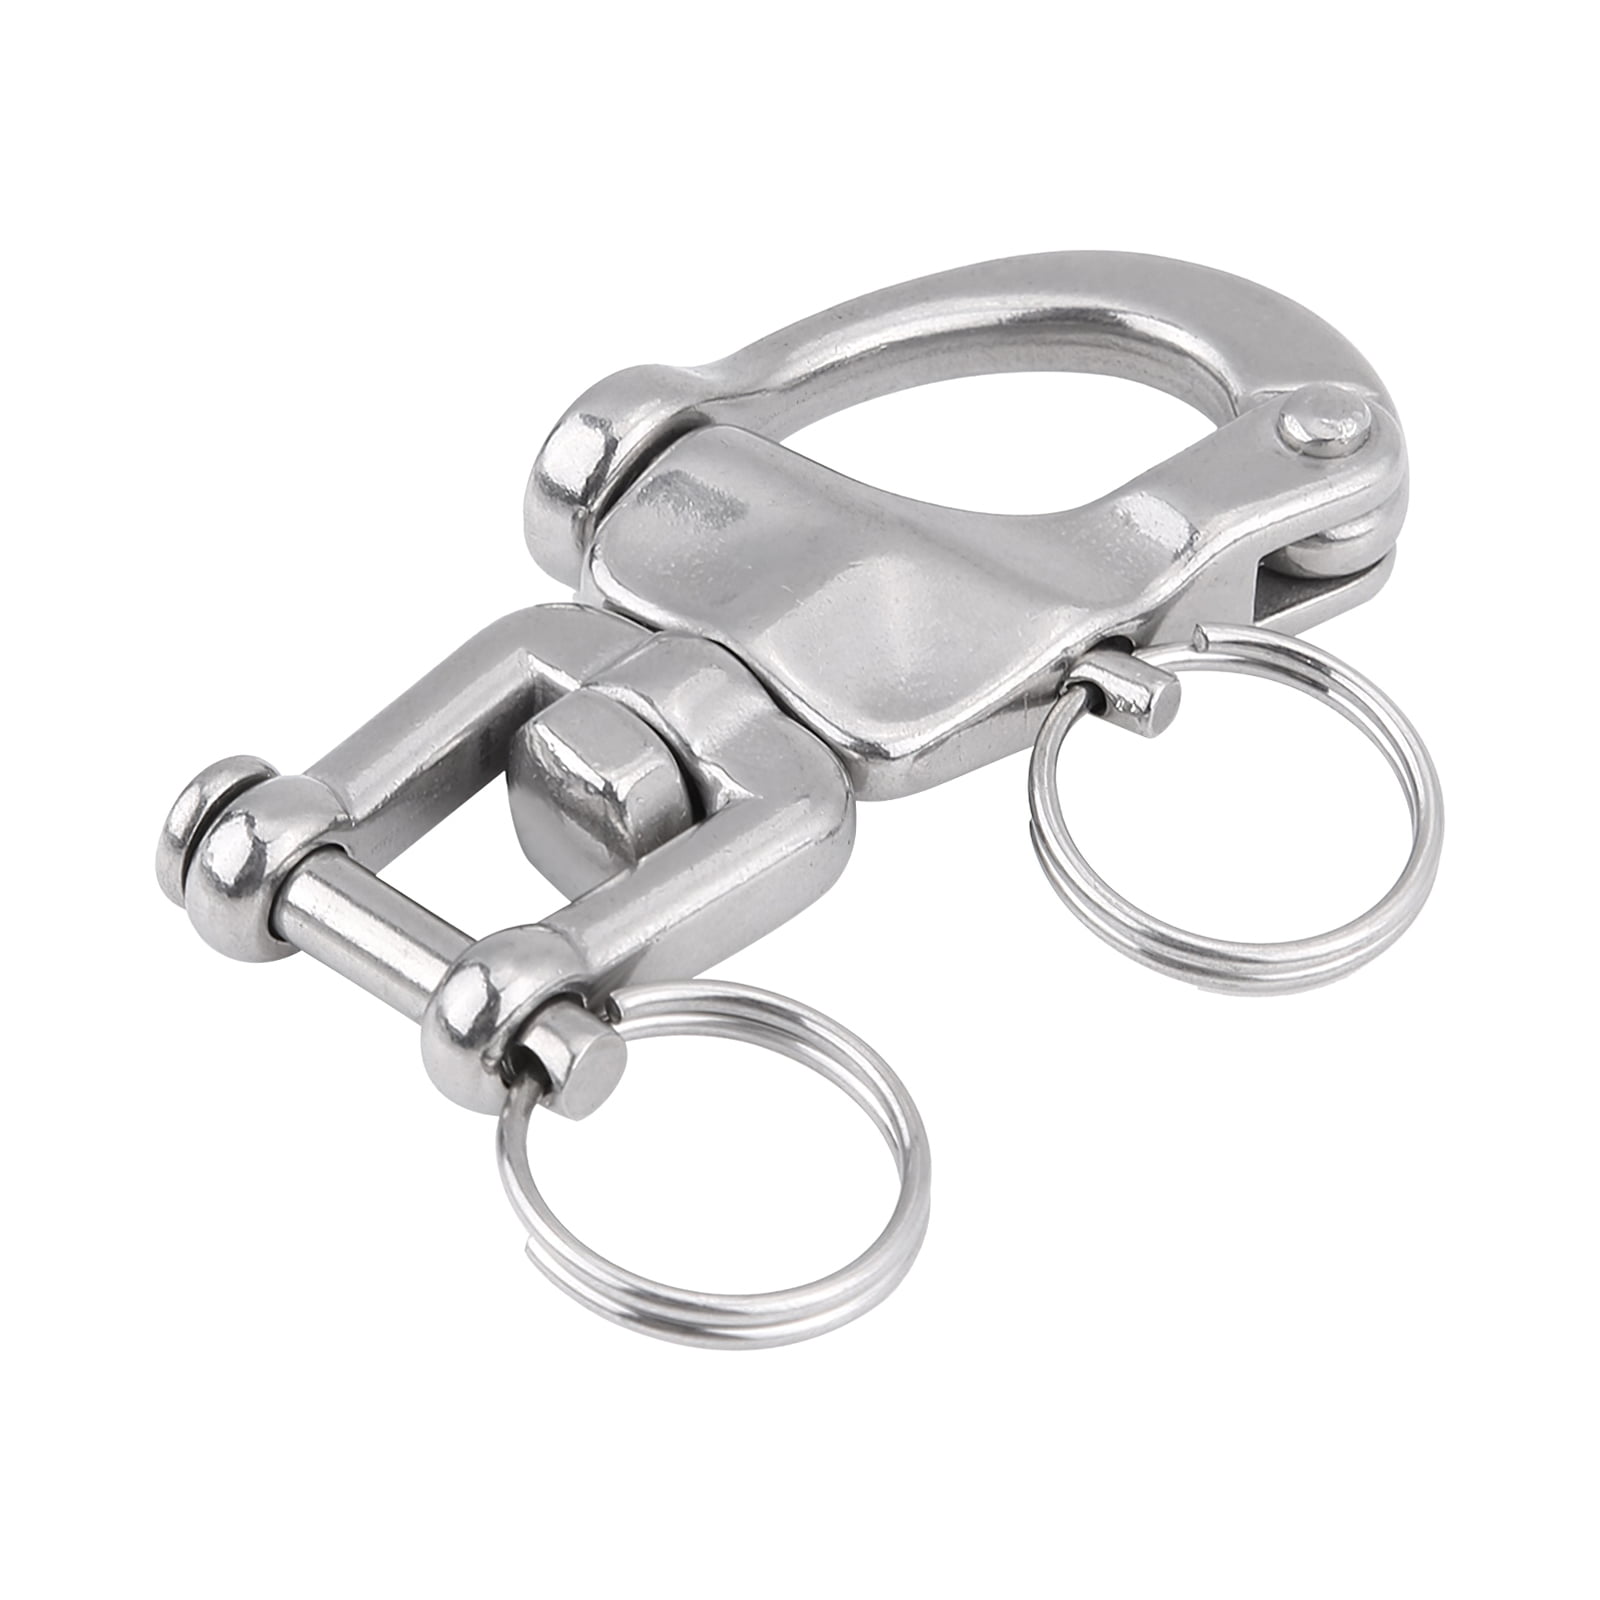 Stainless Steel Swivel Snap Shackle Sailing Boat Yacht with Double Ring 